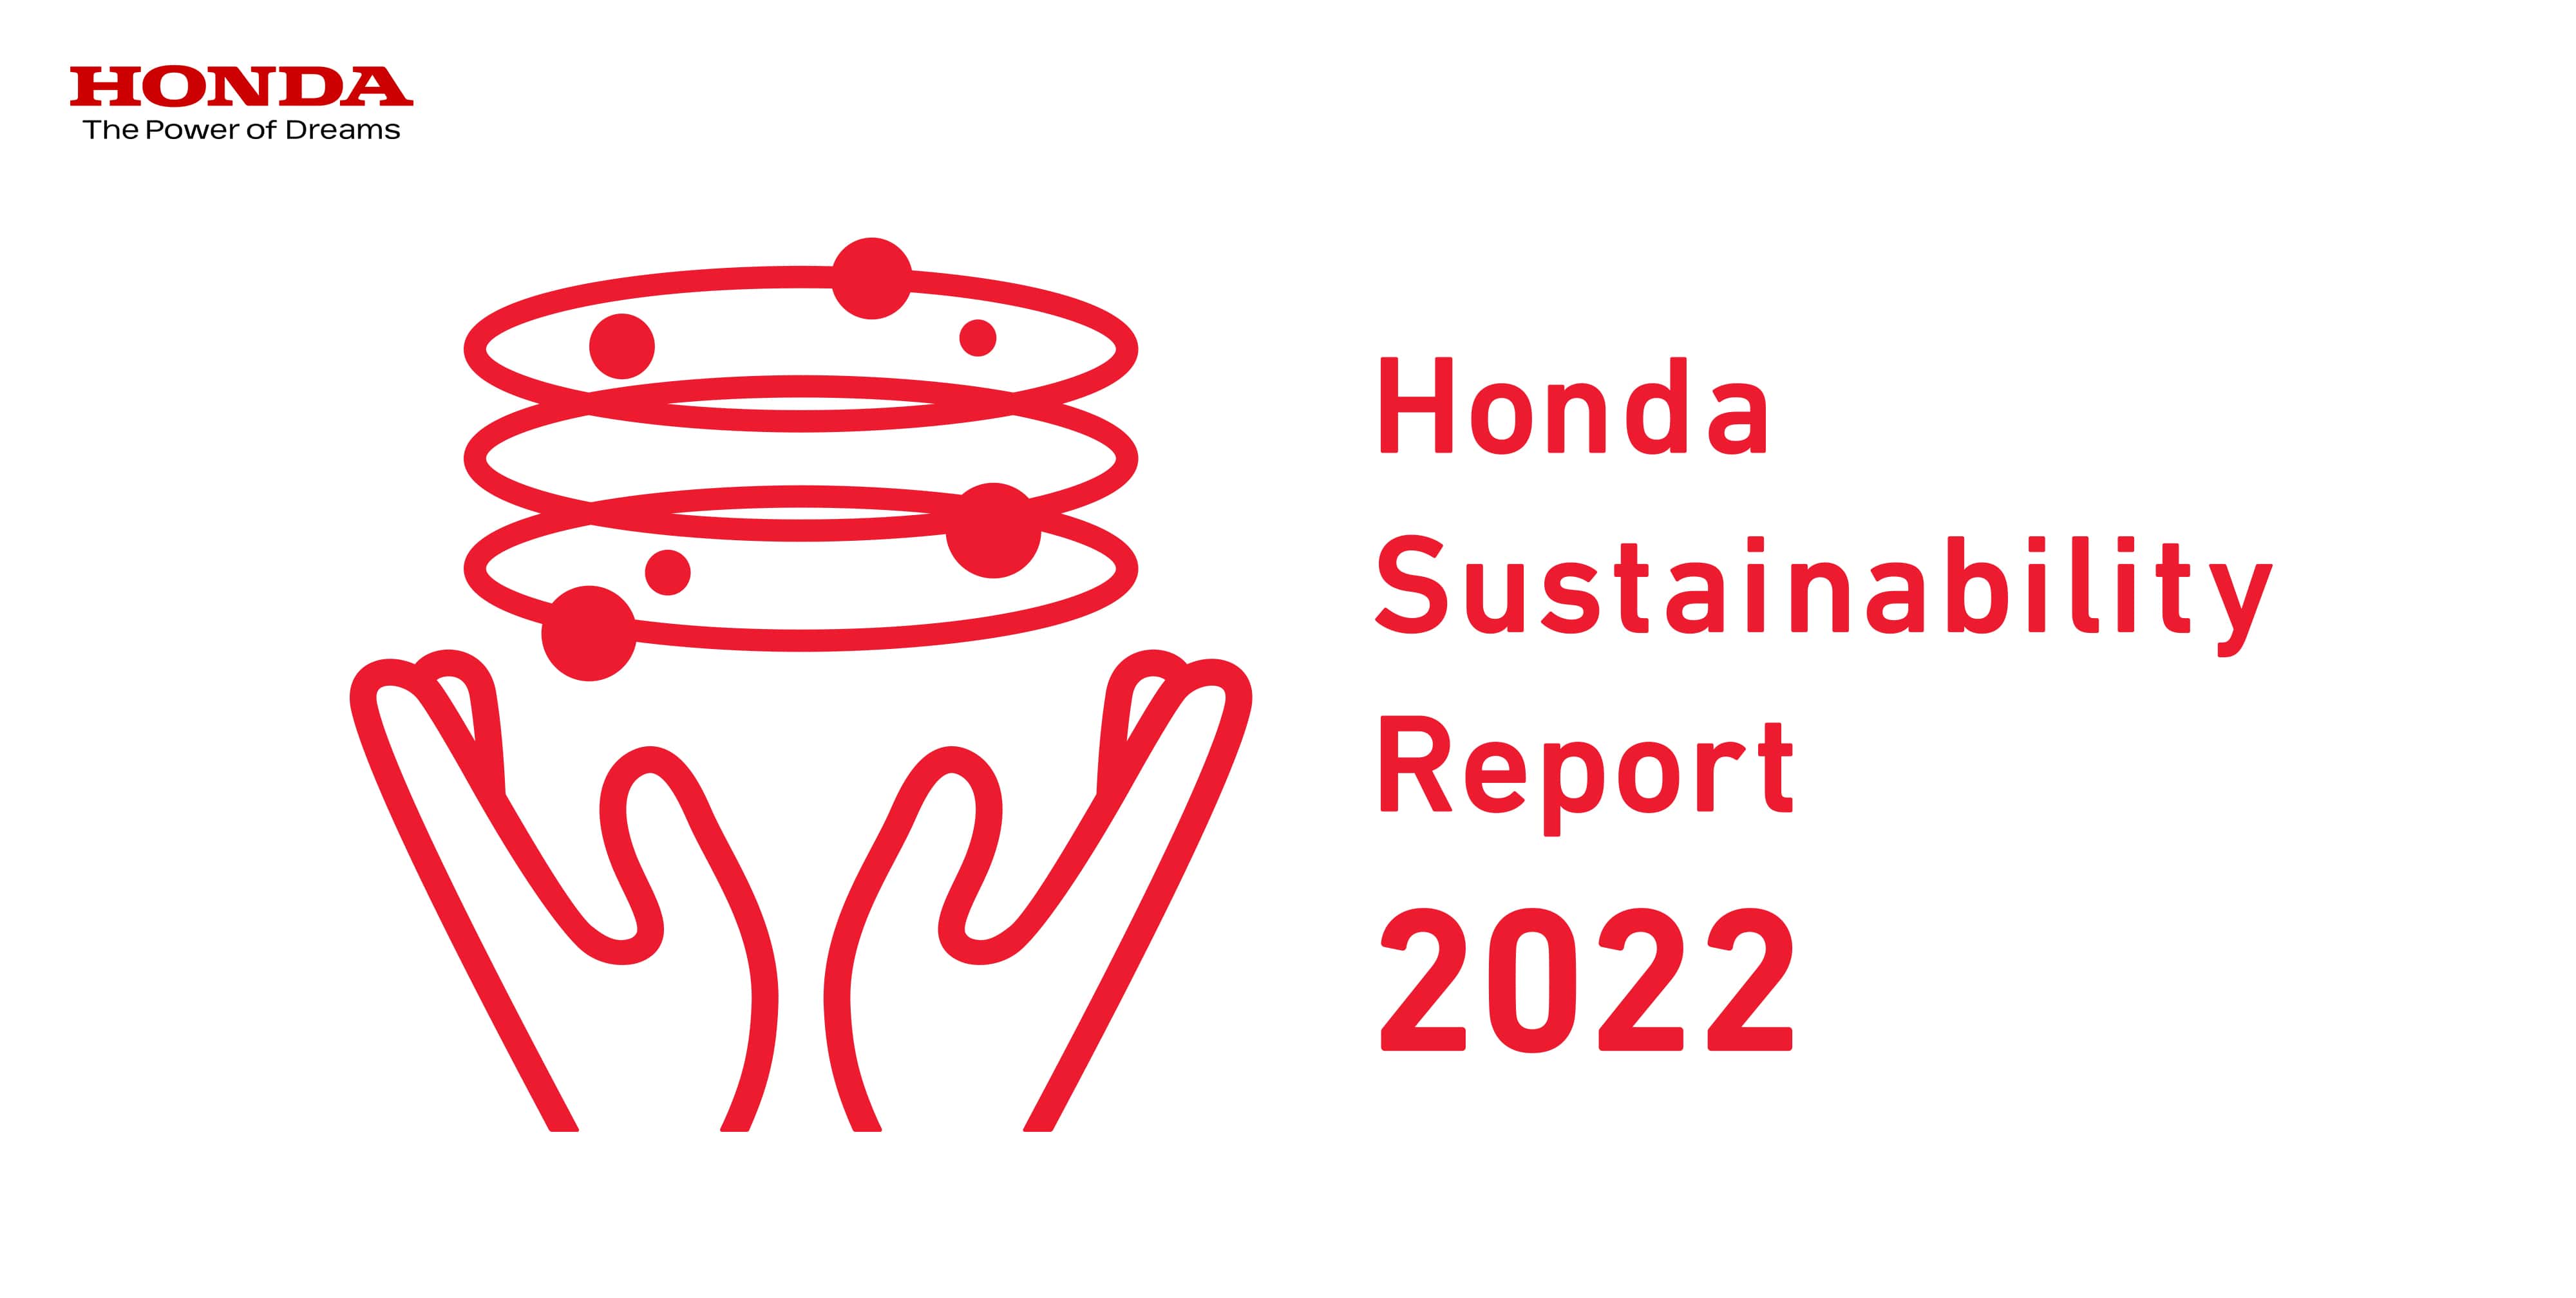 Honda Releases Its 2022 Sustainability Report